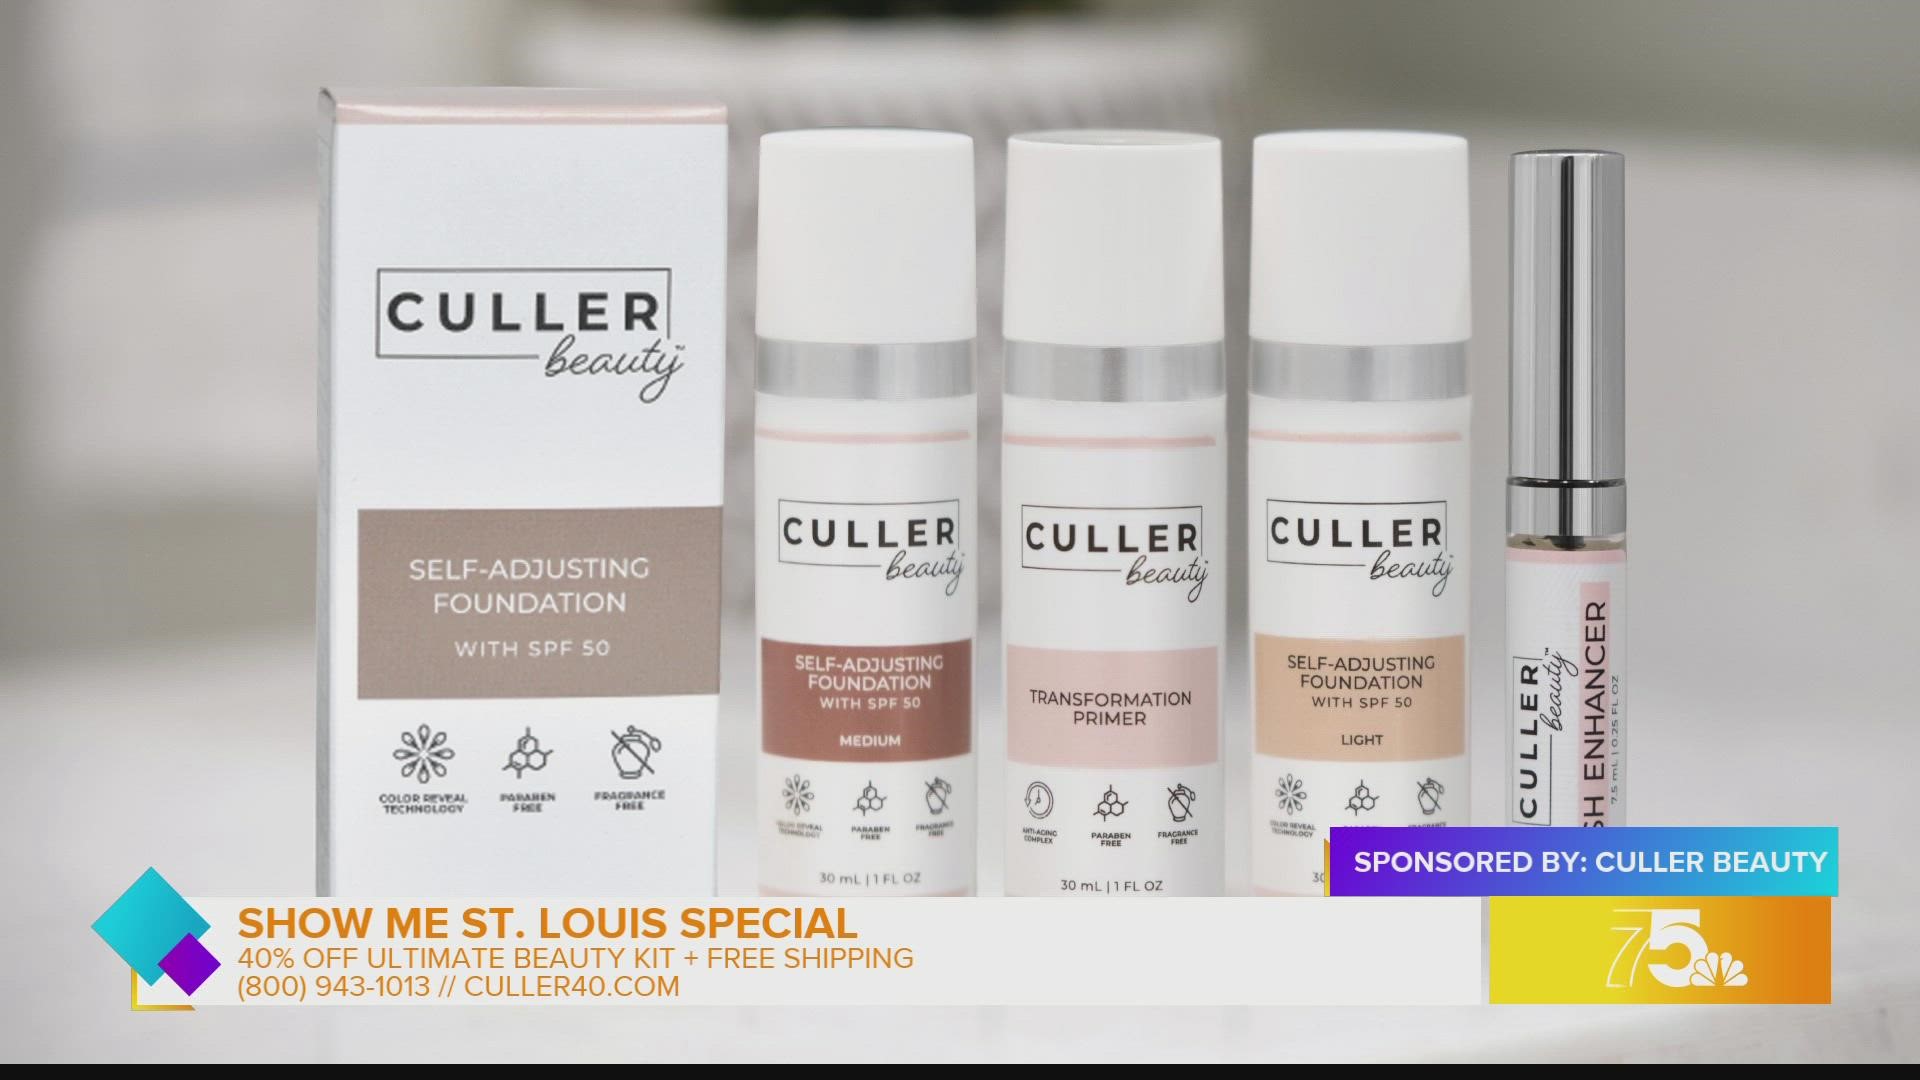 You can grab the Culler Beauty Ultimate Beauty Kit for 40% off plus free shipping.